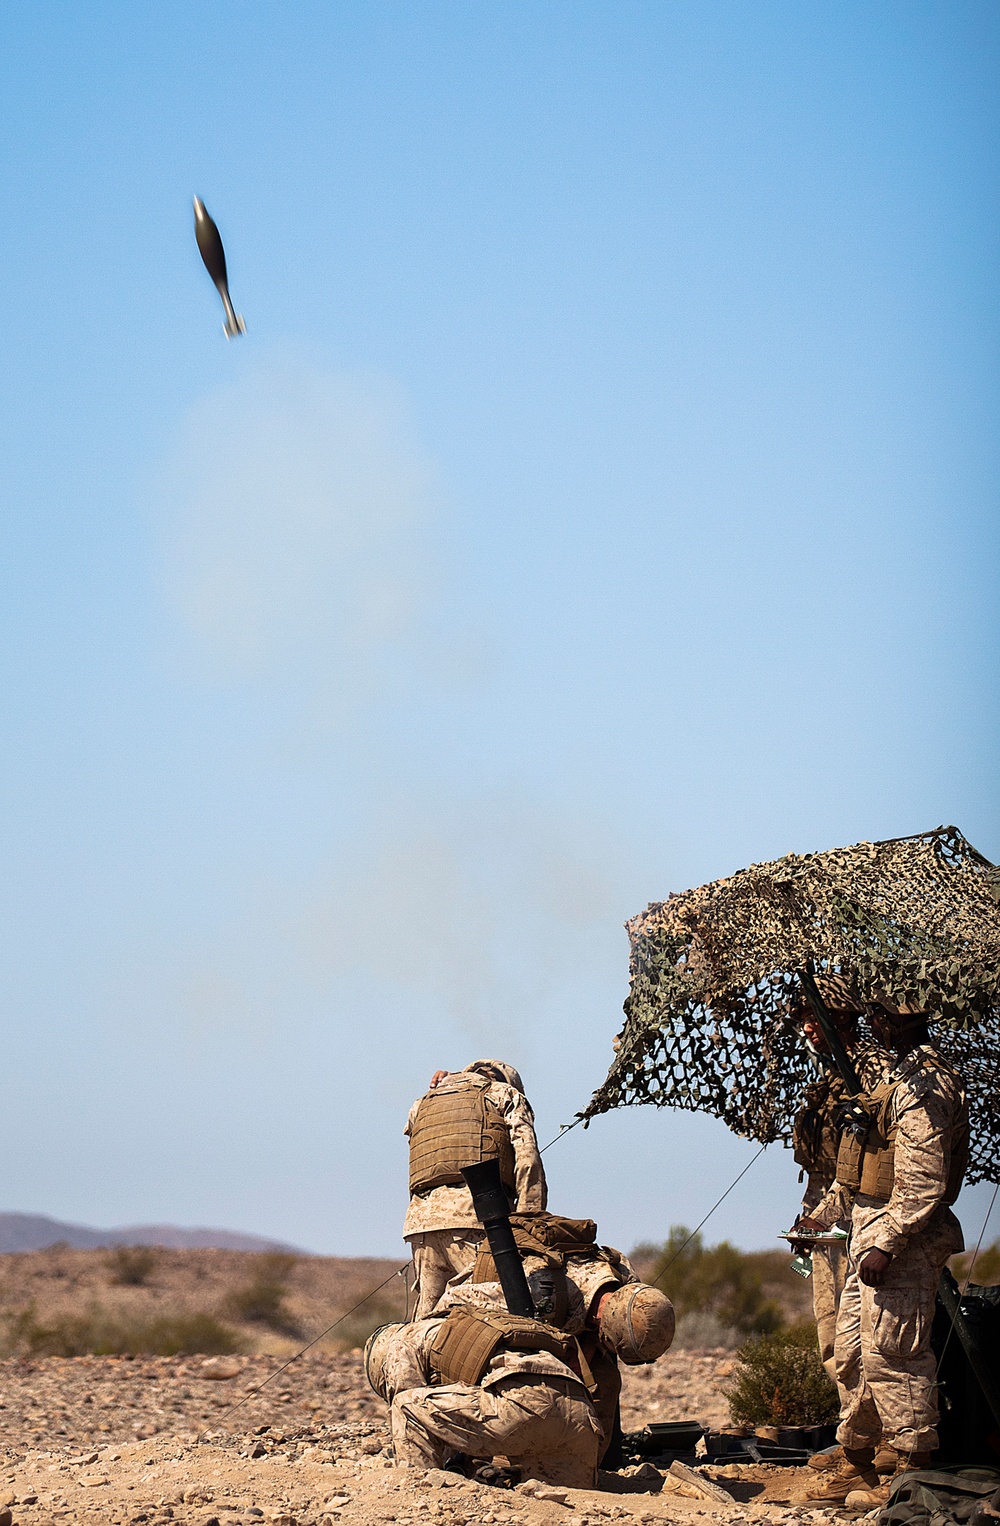 Symphony of fire: ‘America’s Battalion’ air, ground forces combine for fire support coordination exercise